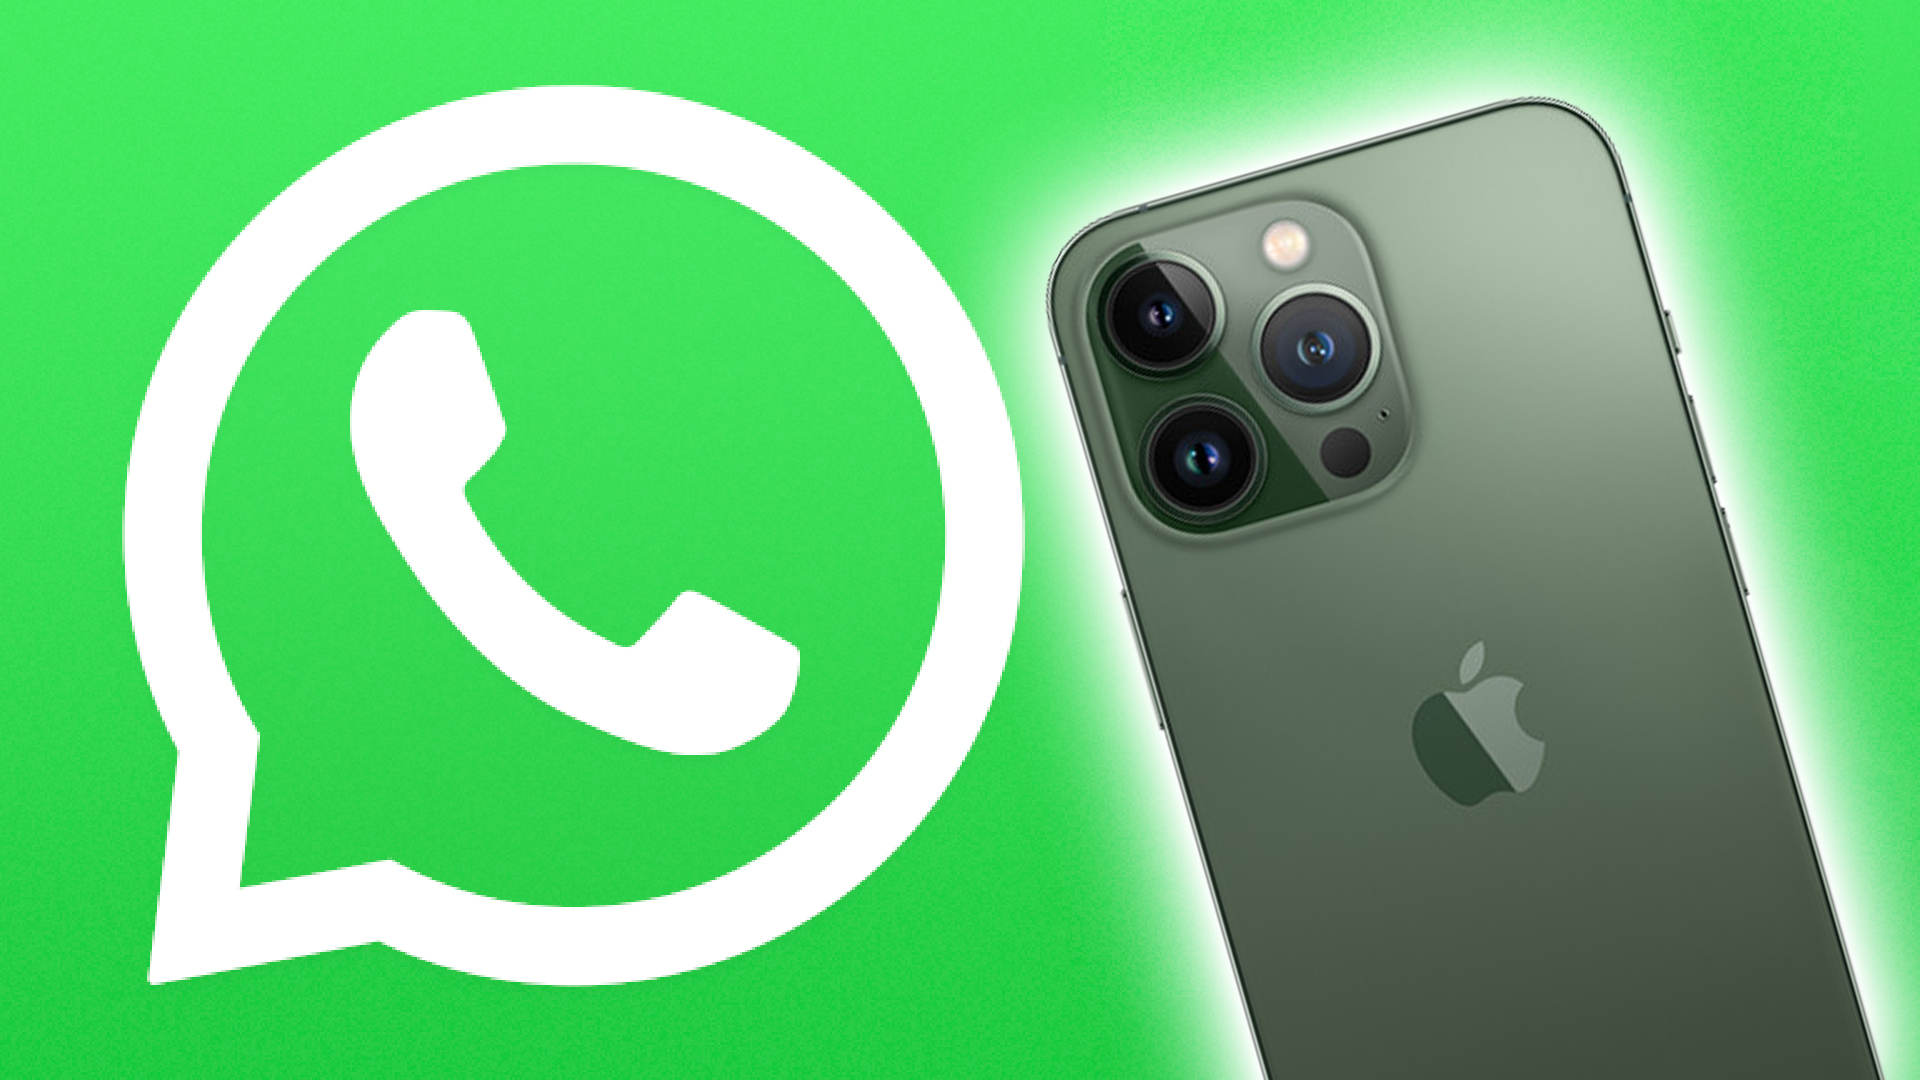 There's a secret WhatsApp button on your iPhone that unlocks hidden features